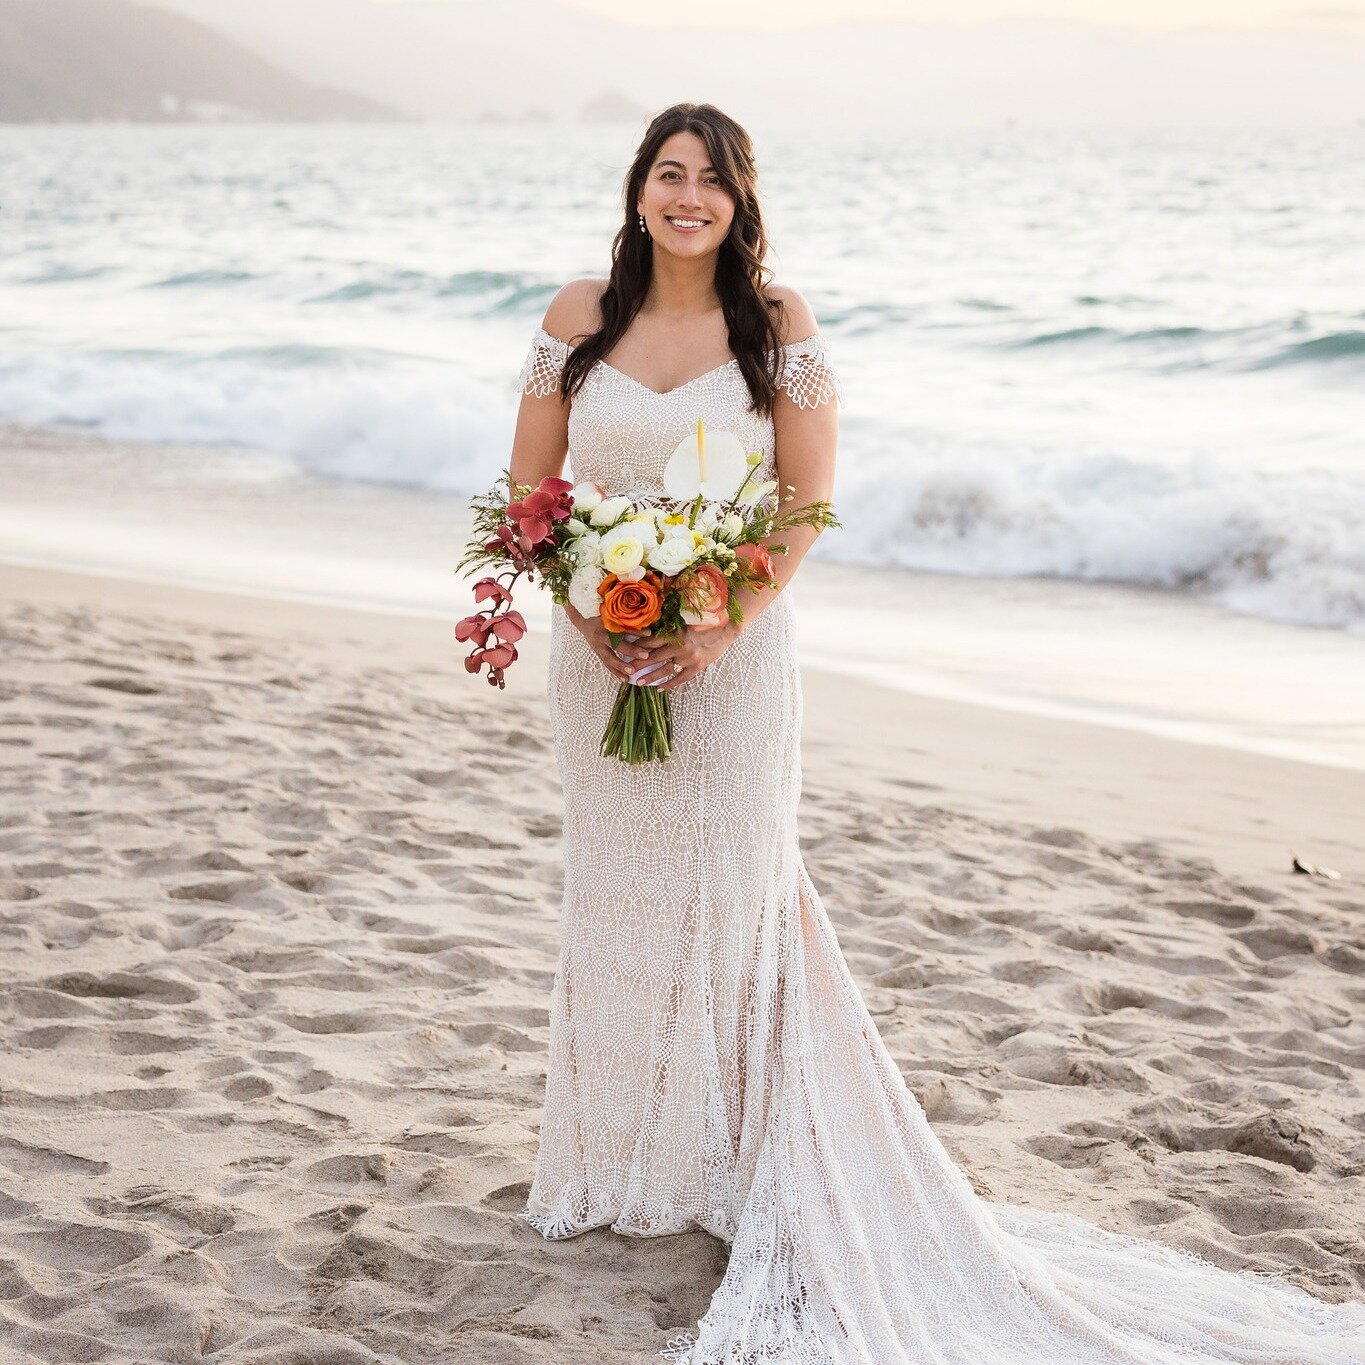 My #reallifebride Hailey sent me photos from her Mexico wedding. Hailey is just about the most laidback and patient bride I have ever had, and she was great to work with. I had to have her back multiple times to make sure the top of her dress fit per